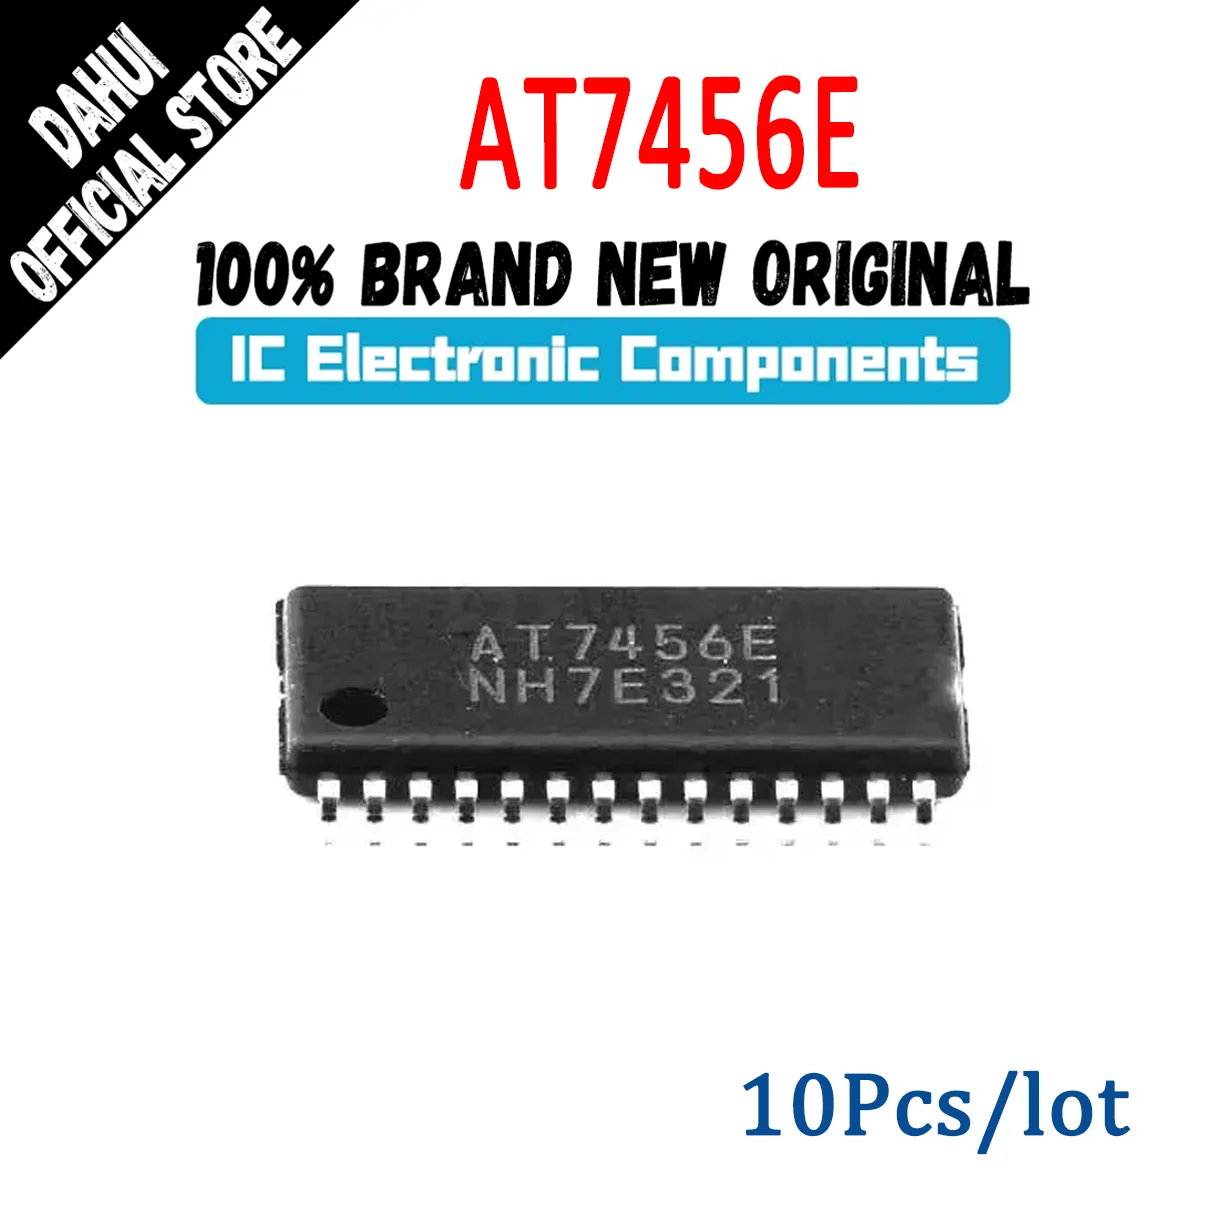 

10 Pcs AT7456E AT7456 AT IC Chip ROM EEPROM TSSOP-28 In Stock 100% New Originl